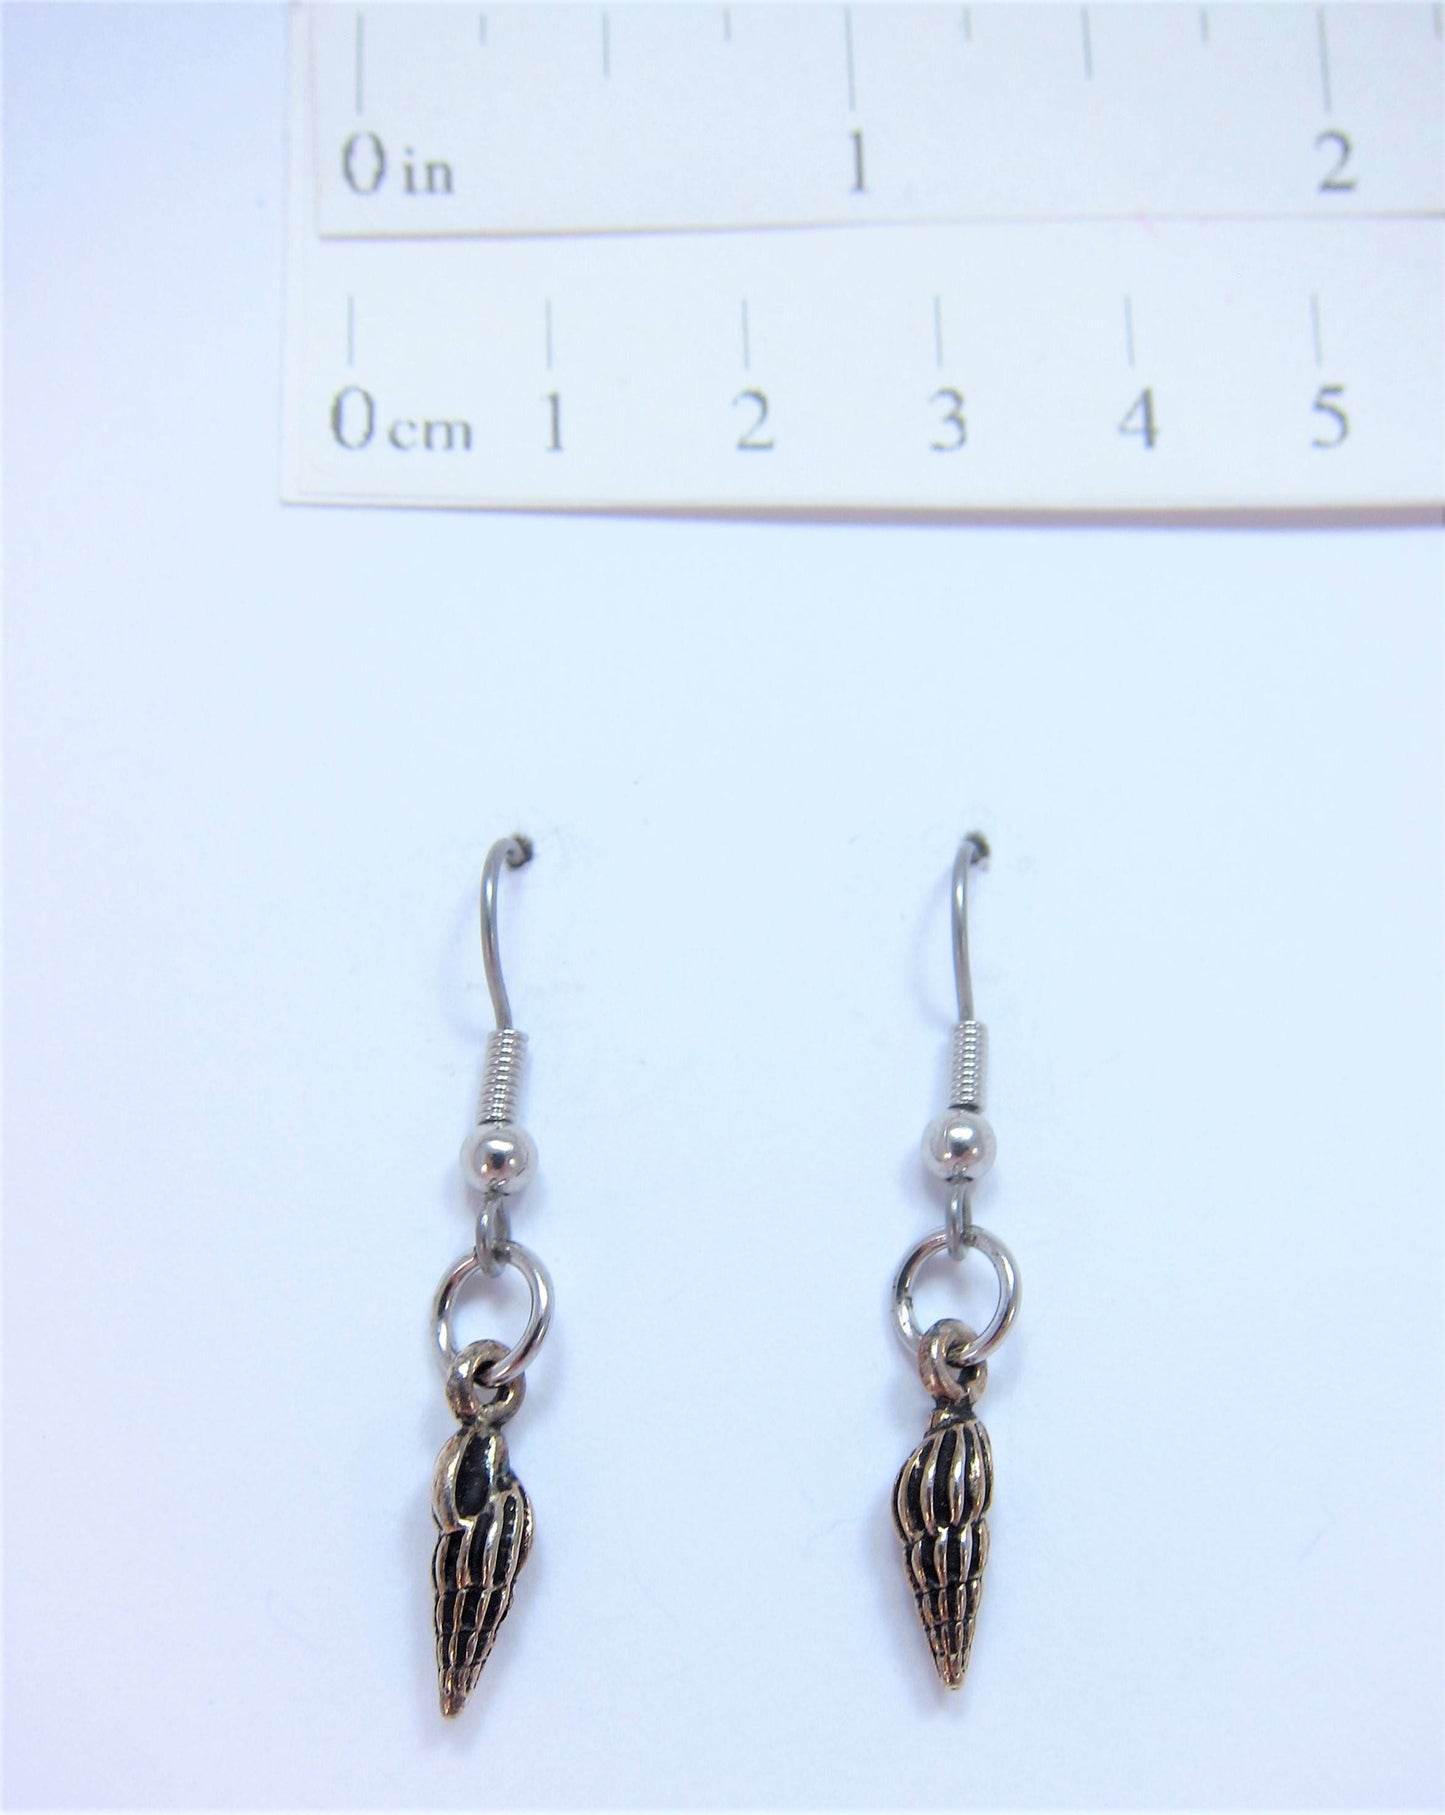 Charmed! Spiral sea shell earrings silver plate antique finish on hypoallergenic surgical steel hooks